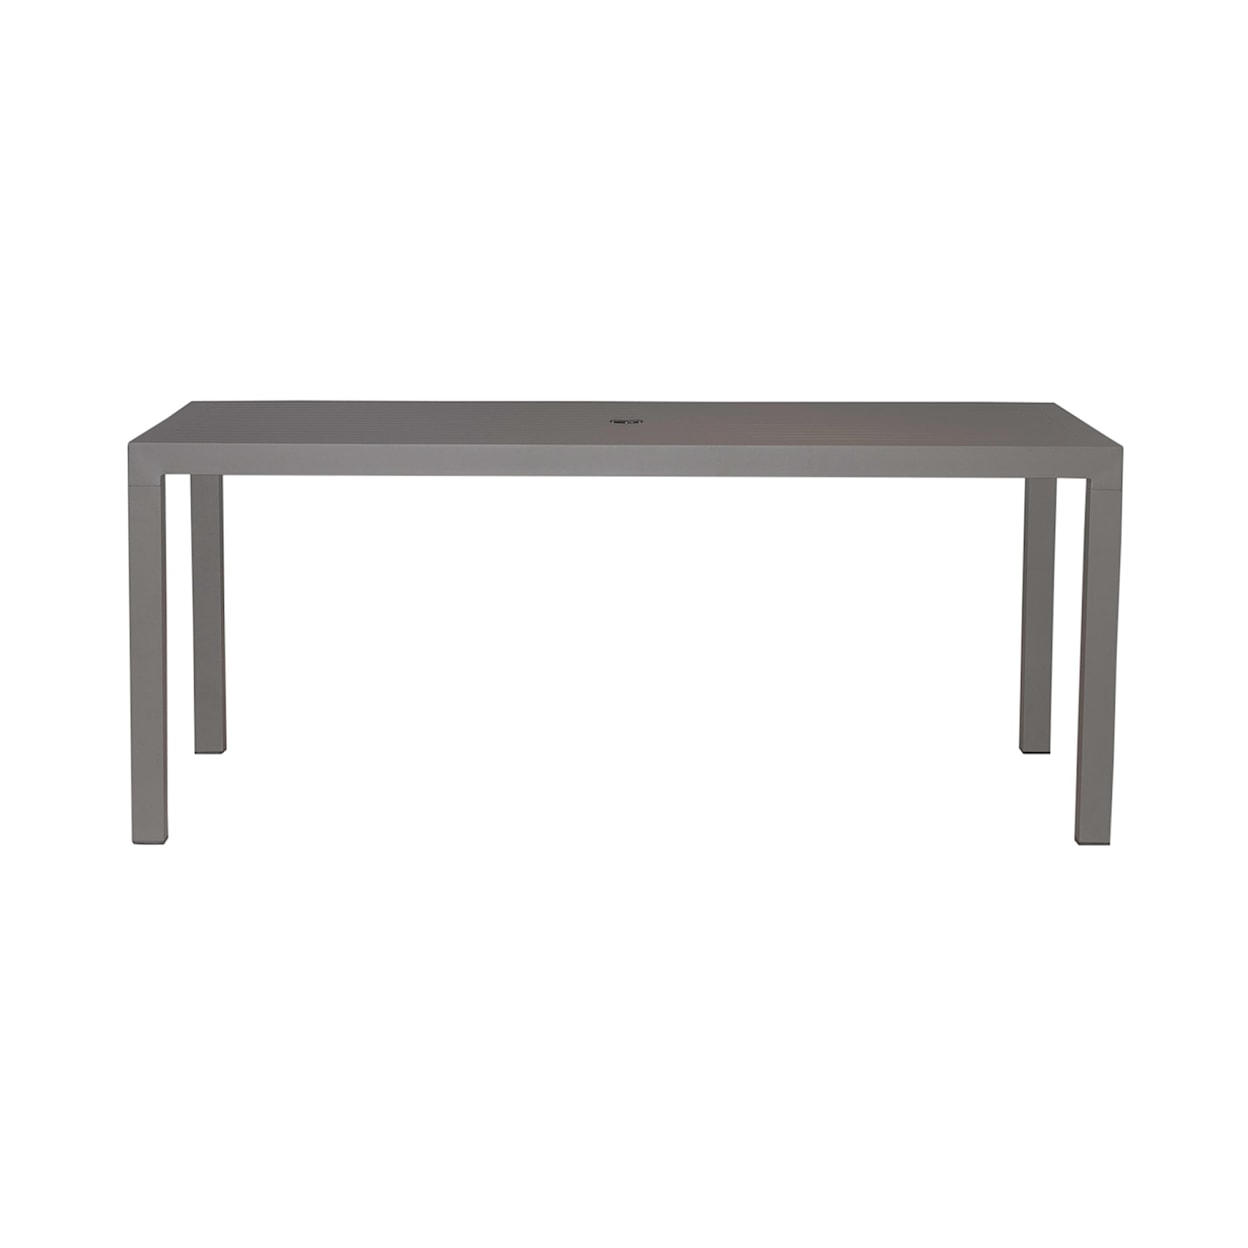 Liberty Furniture Plantation Key Outdoor Dining Table